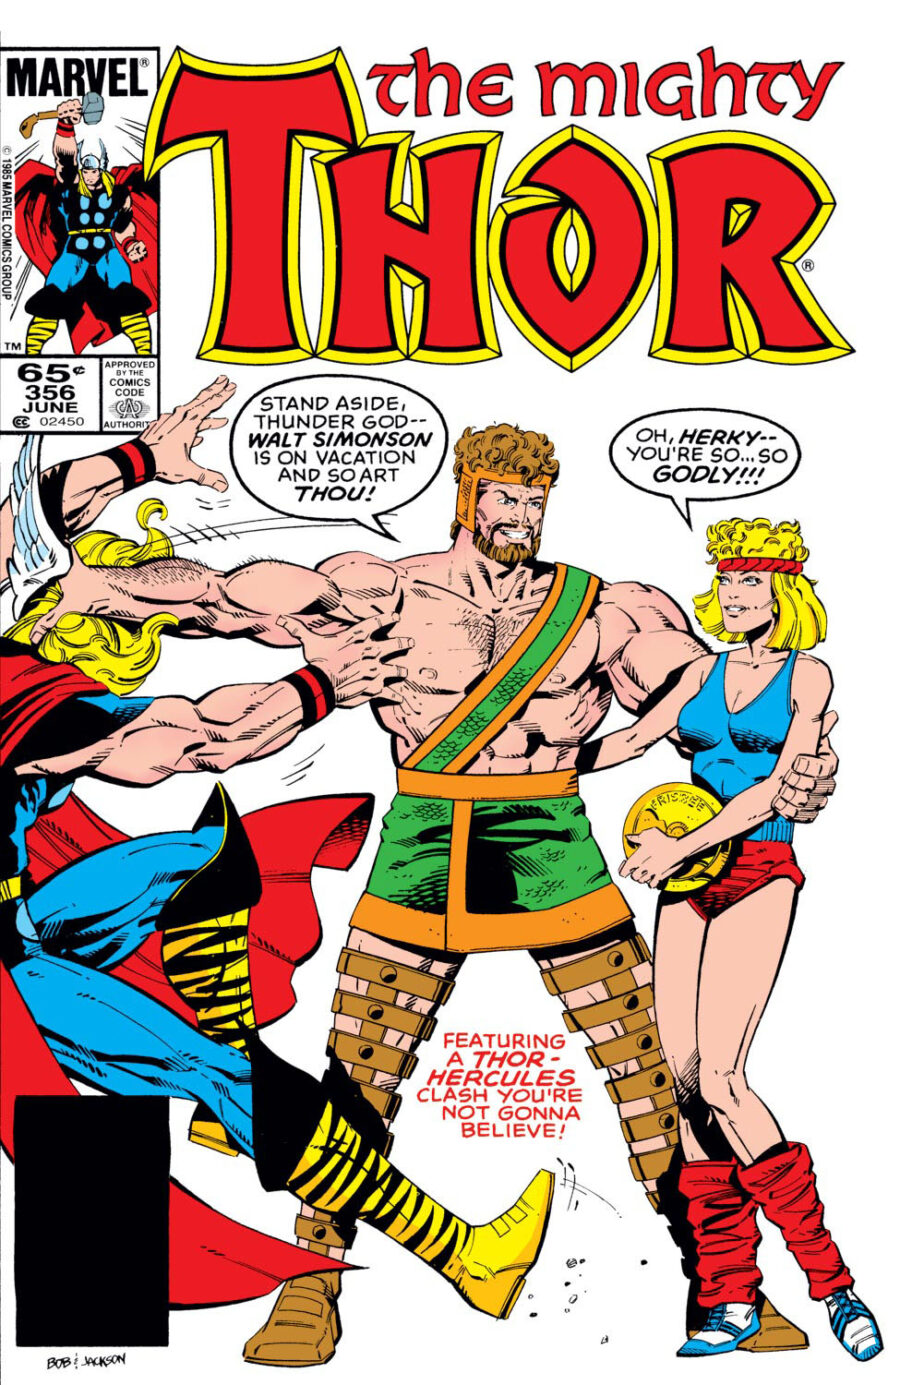 The Untold Truth Of Marvel's Hercules